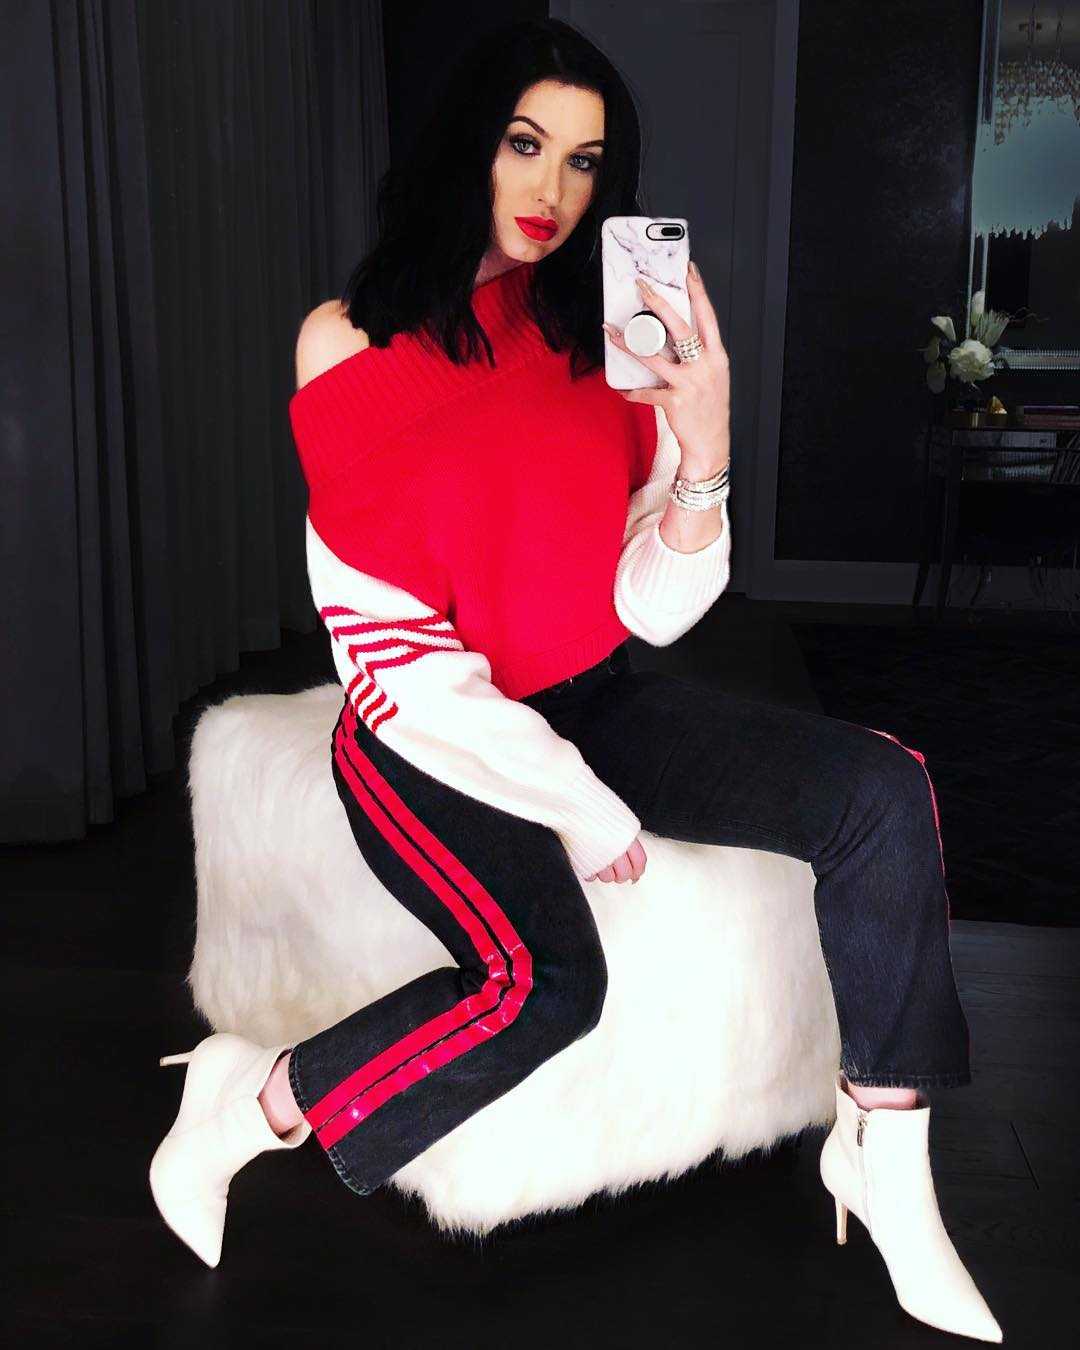 51 Sexy Jaclyn Hill Boobs Pictures Will Induce Passionate Feelings for Her 40